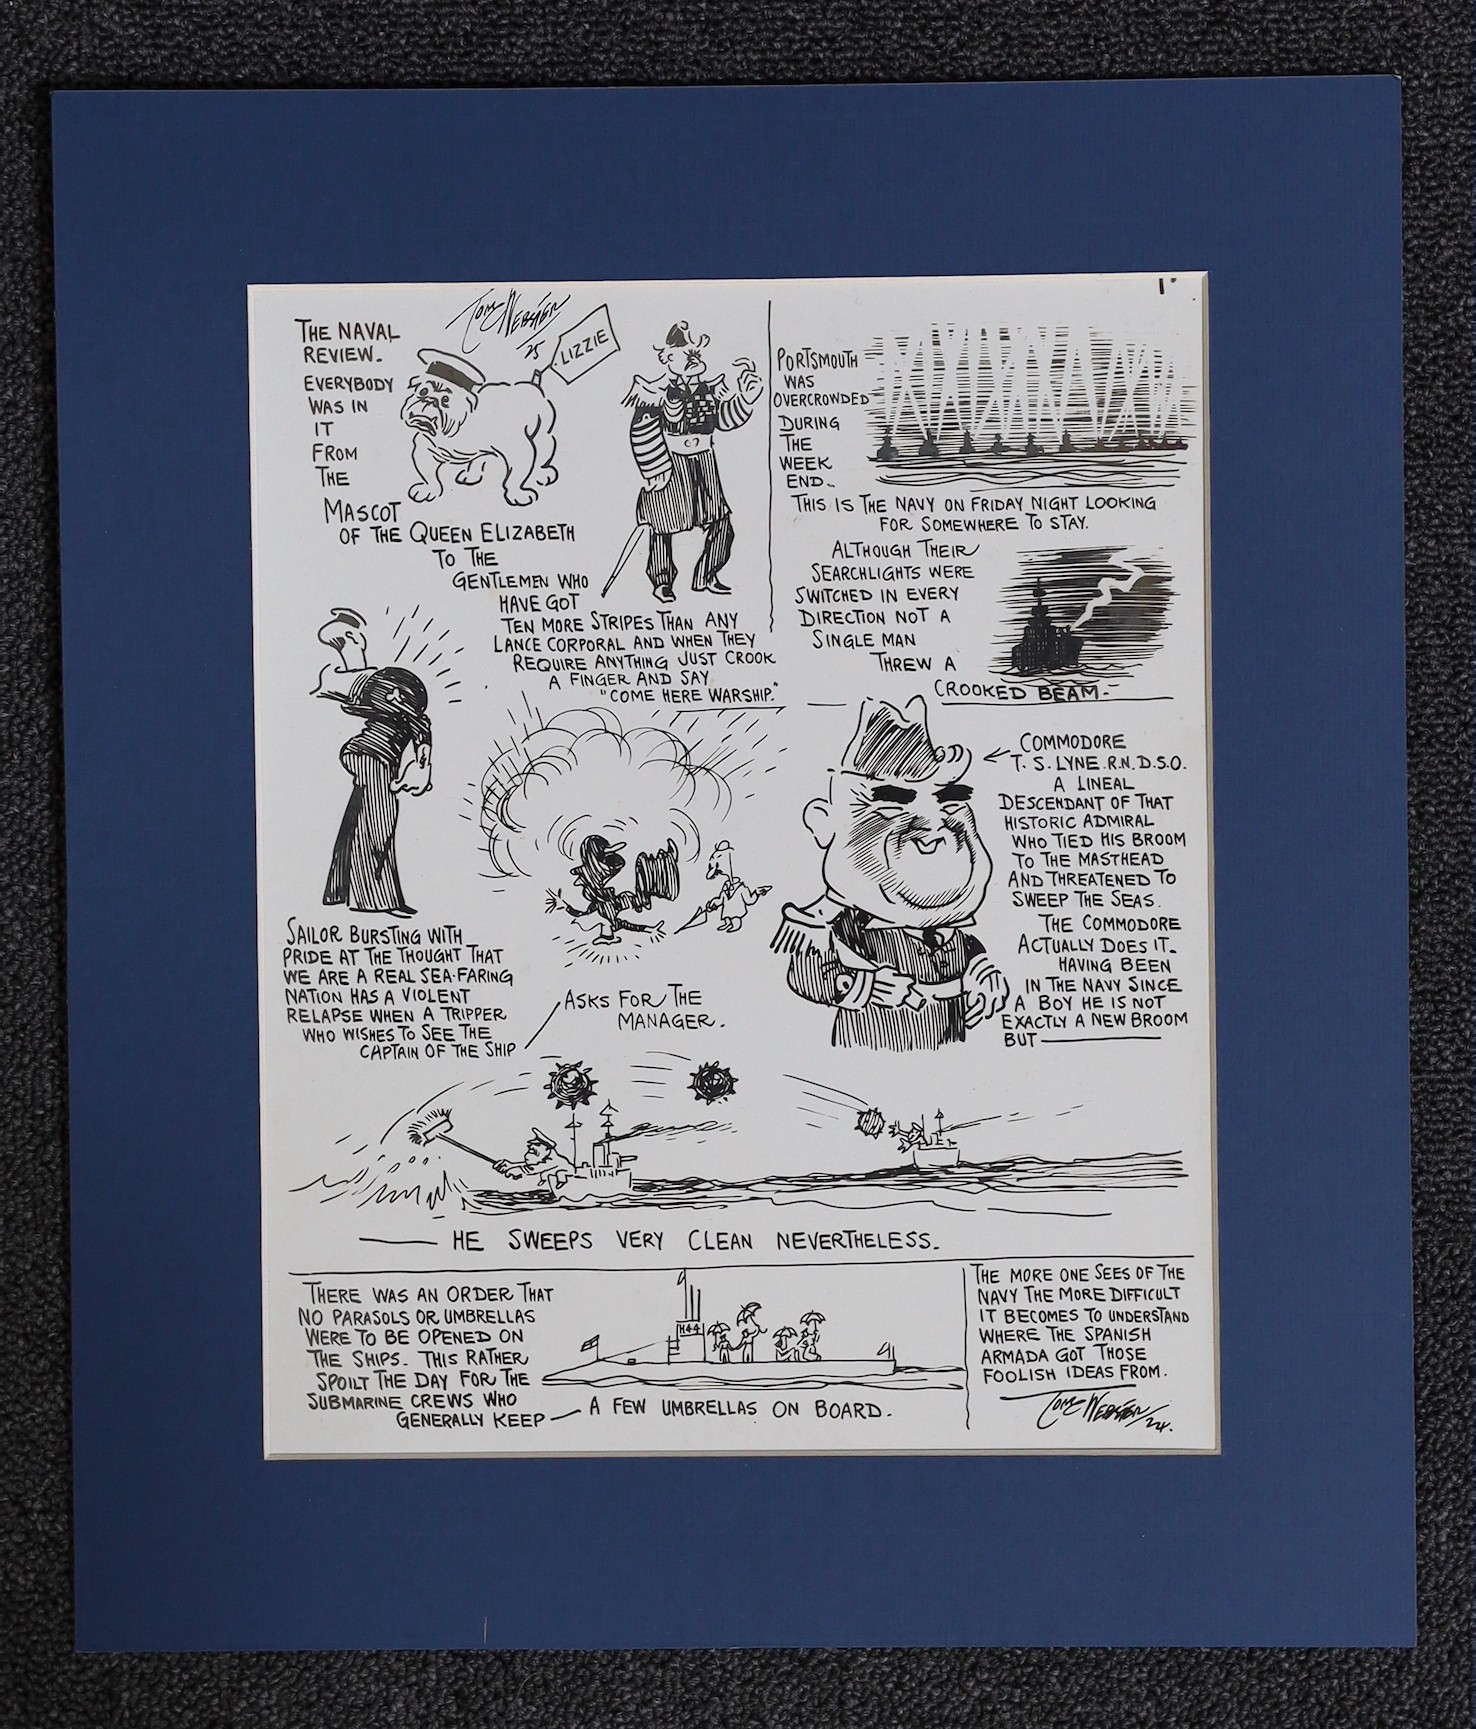 Tony Webster (Daily Mail cartoonist), 'The Naval Review', Royal Naval Review July 1924, ink on card, 30 x 24cm, unframed